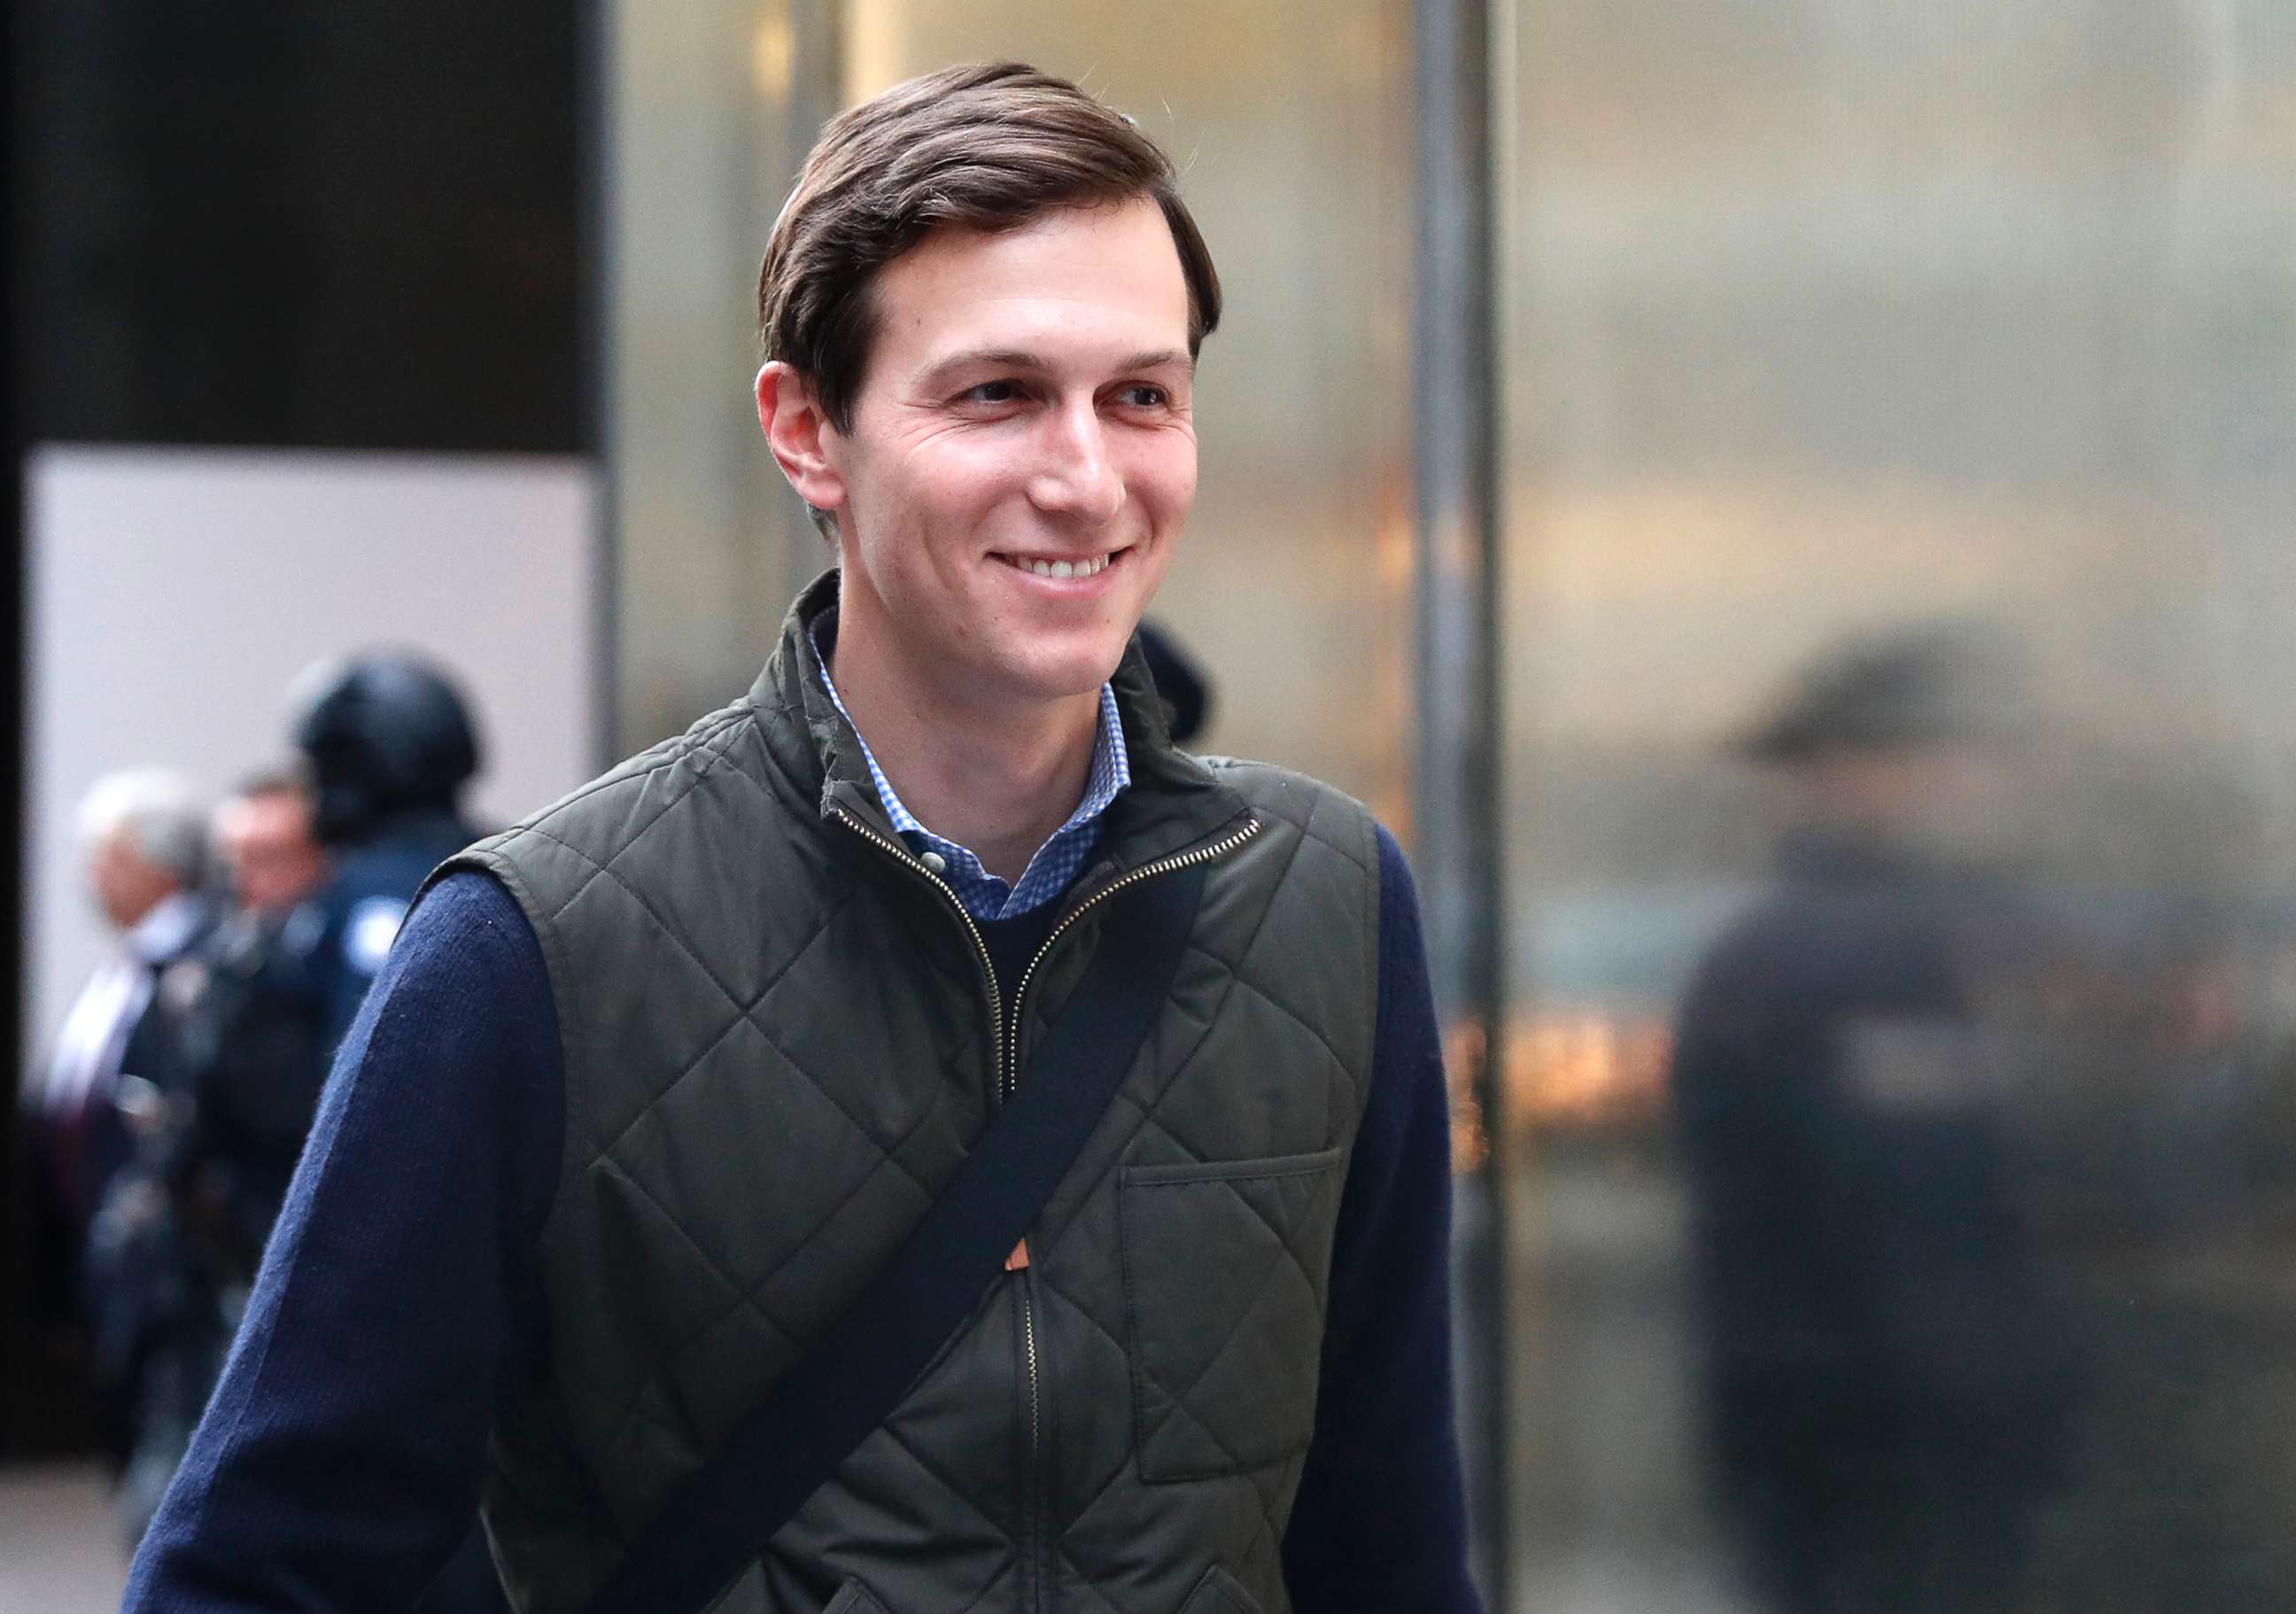 PHOTO: In this Nov. 14, 2016 file photo, Jared Kushner, son-in-law of of President-elect Donald Trump walks from Trump Tower, in New York.